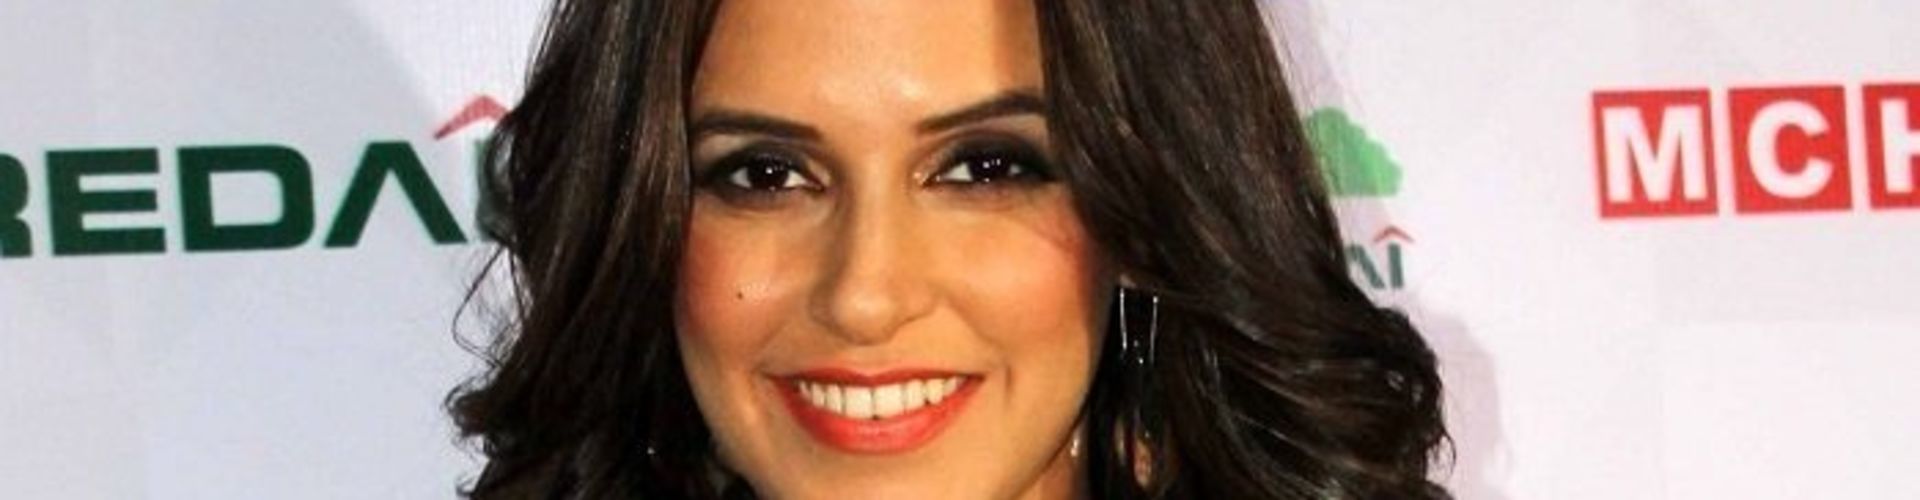 Understanding the audience is most important in filmmaking says Neha Dhupia